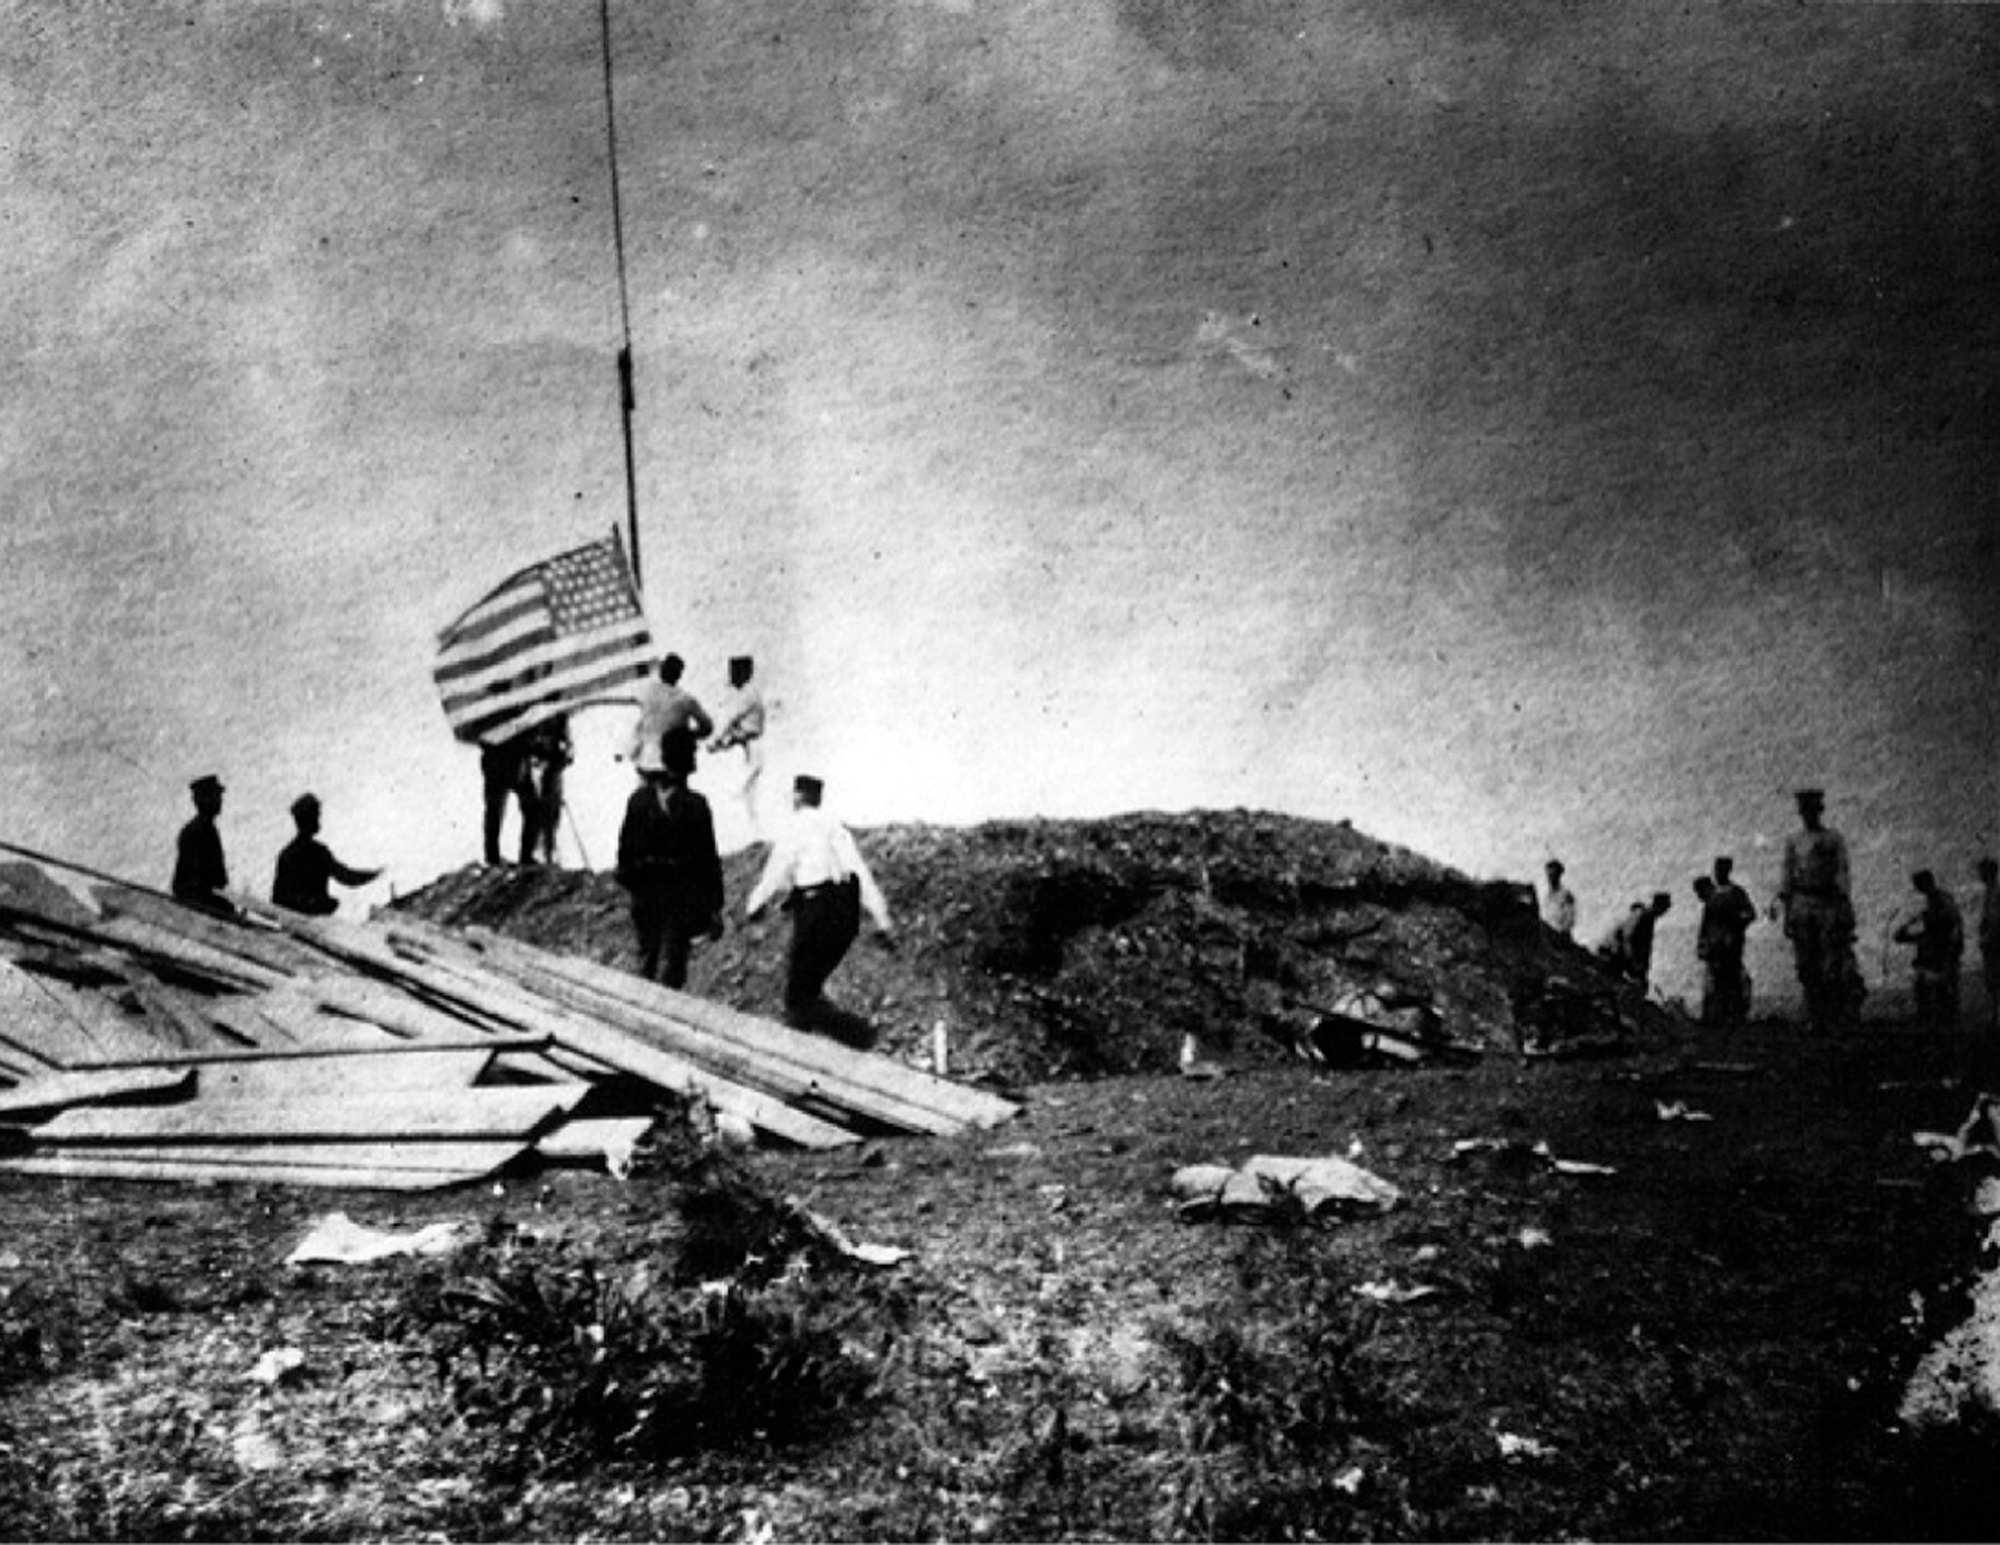 An eighteen ninety-eight photograph of United States soldiers raising the American flag at Guantánamo during the Spanish American war.